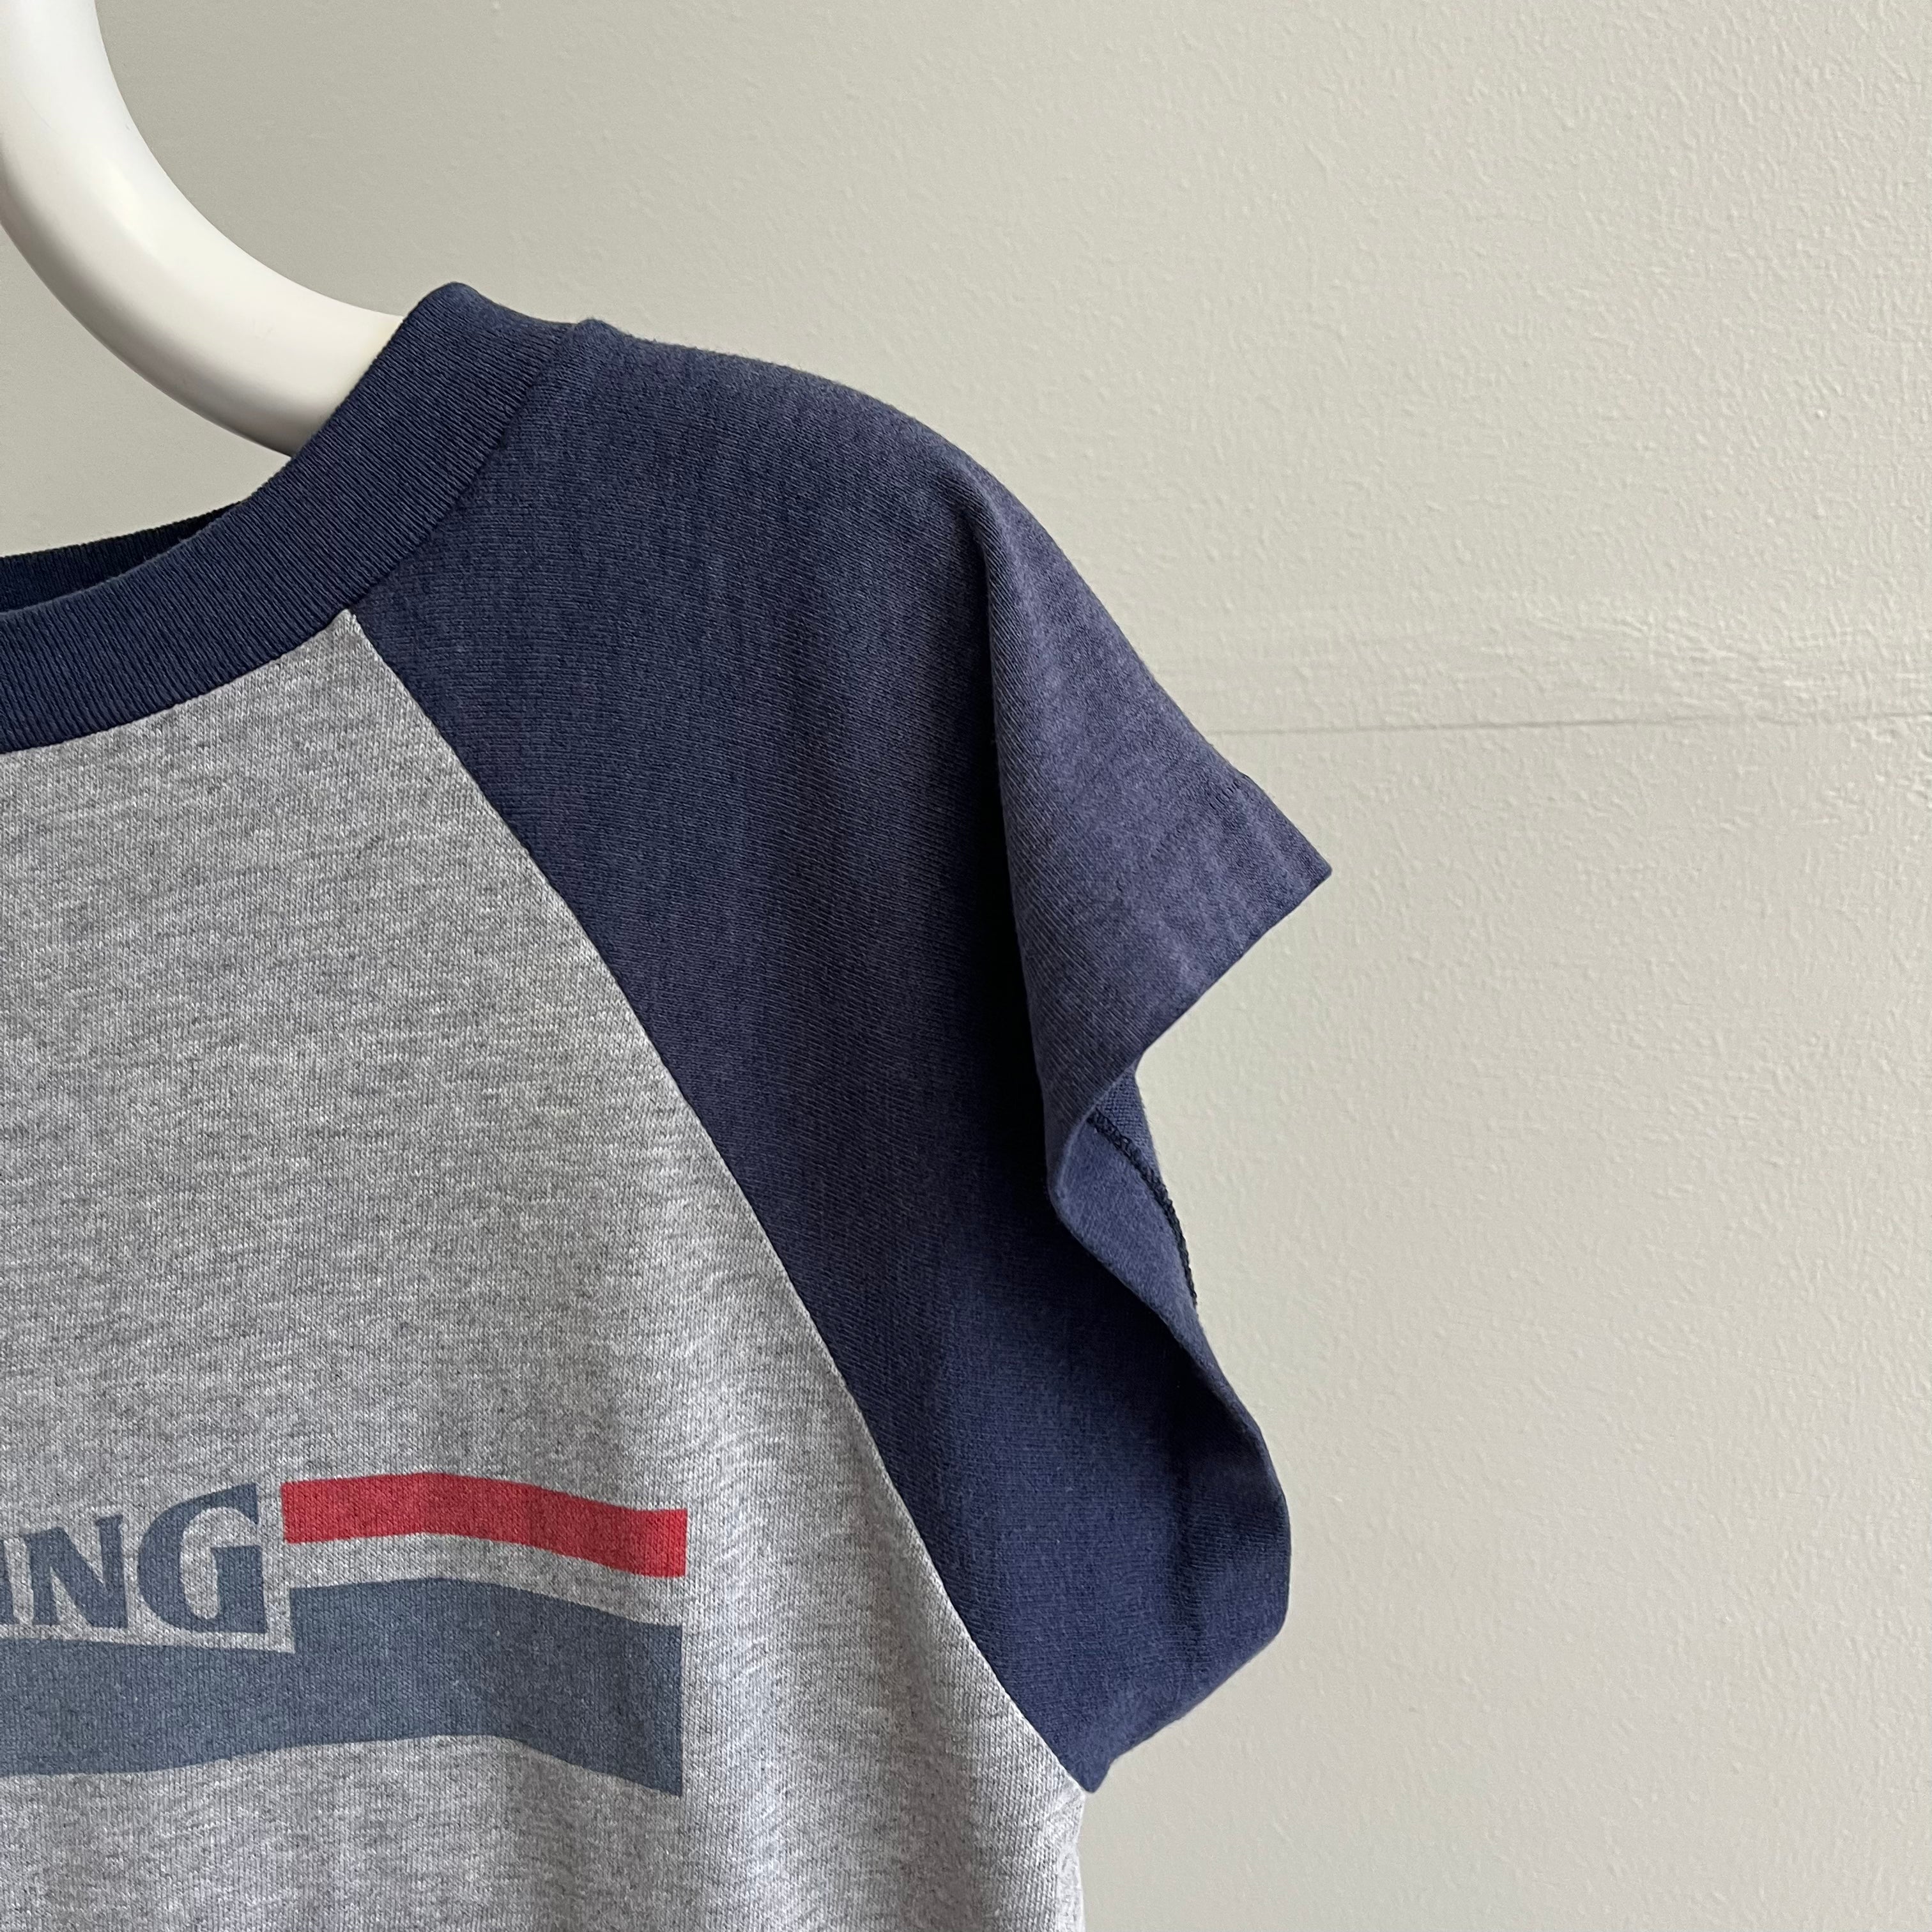 1980s Spaulding Short Sleeve T-Shirt Style Muscle Warm Up